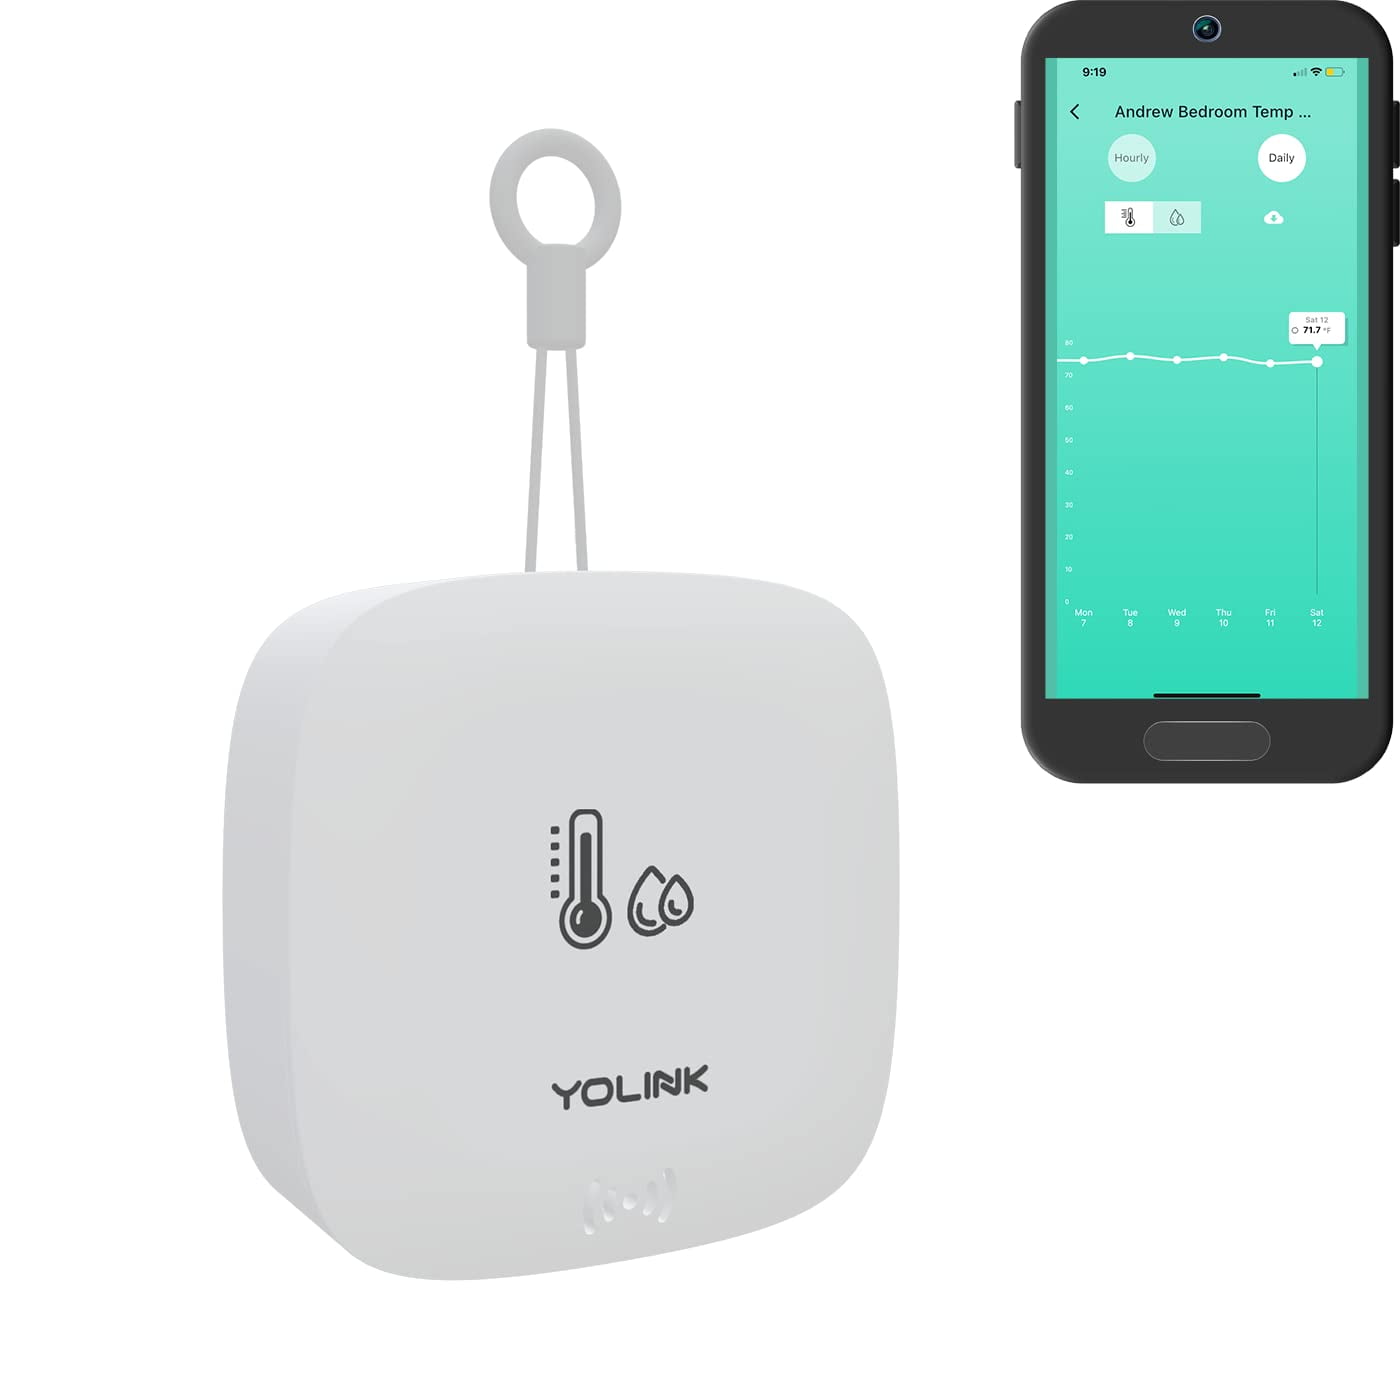 YoLink Smart Wireless Temperature/Humidity Sensor Wide Range (-22 to 158  degrees) Works with Alexa, 2 Pack - Hub Included YS8003-H2T - The Home Depot